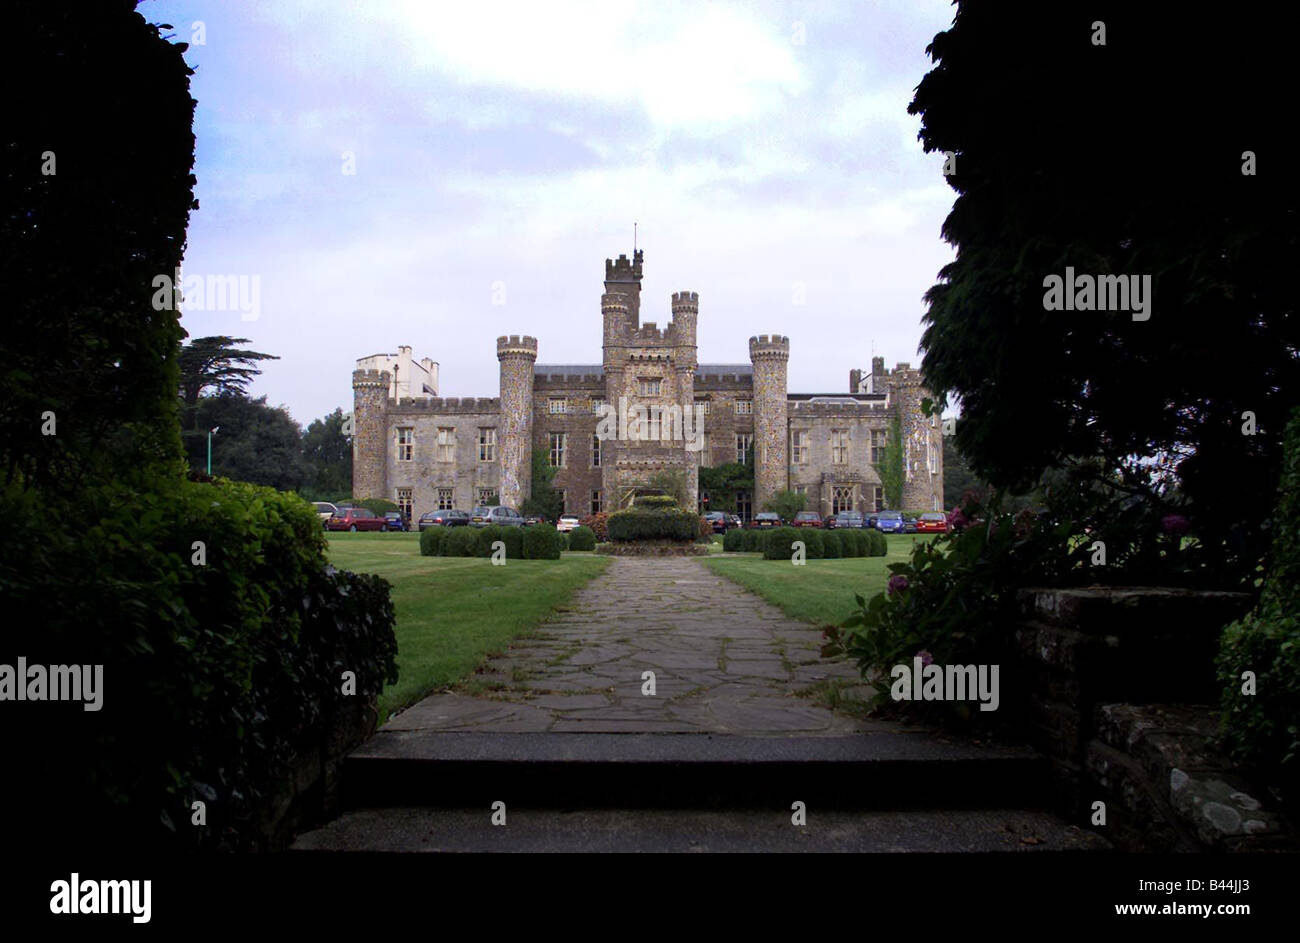 Hensol Ospedale e Hensol castle conference center South Wales Mirrorpix Foto Stock